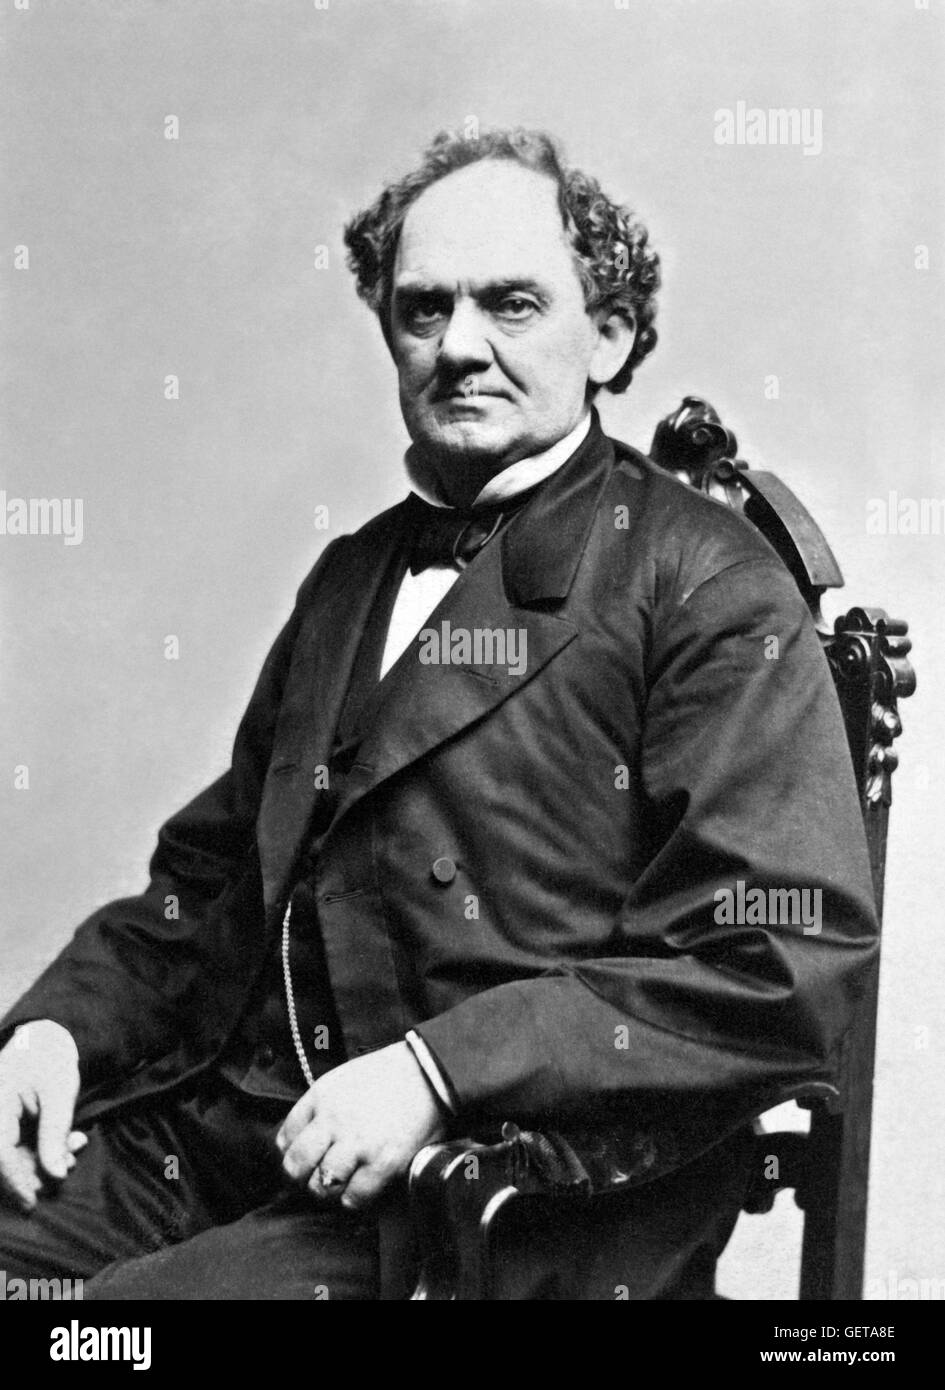 Phineas Taylor 'P. T.' Barnum (1810-1891), an American politician, showman, businessman and founder of the Barnum & Bailey Circus. Portrait by Charles D. Fredricks & Co., c.1860-1864 Stock Photo